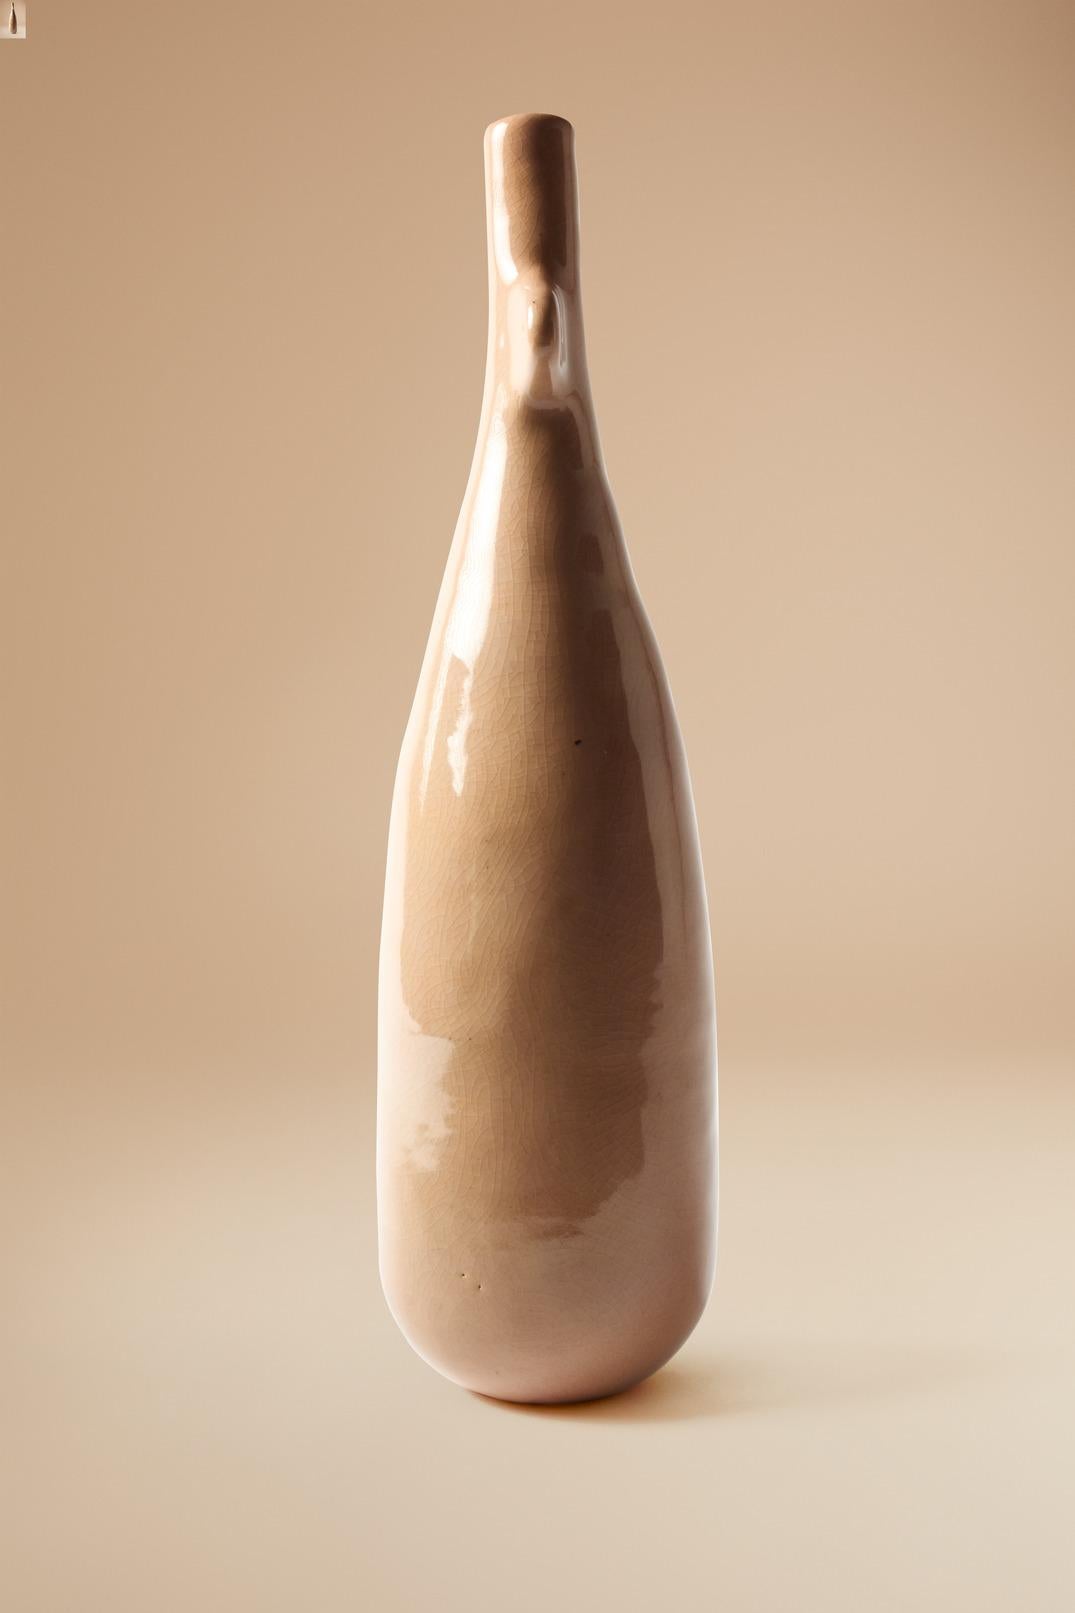 South African Vessel 05 in Smooth Stoneware Clay. Handmade by Jade Paton for Lemon For Sale